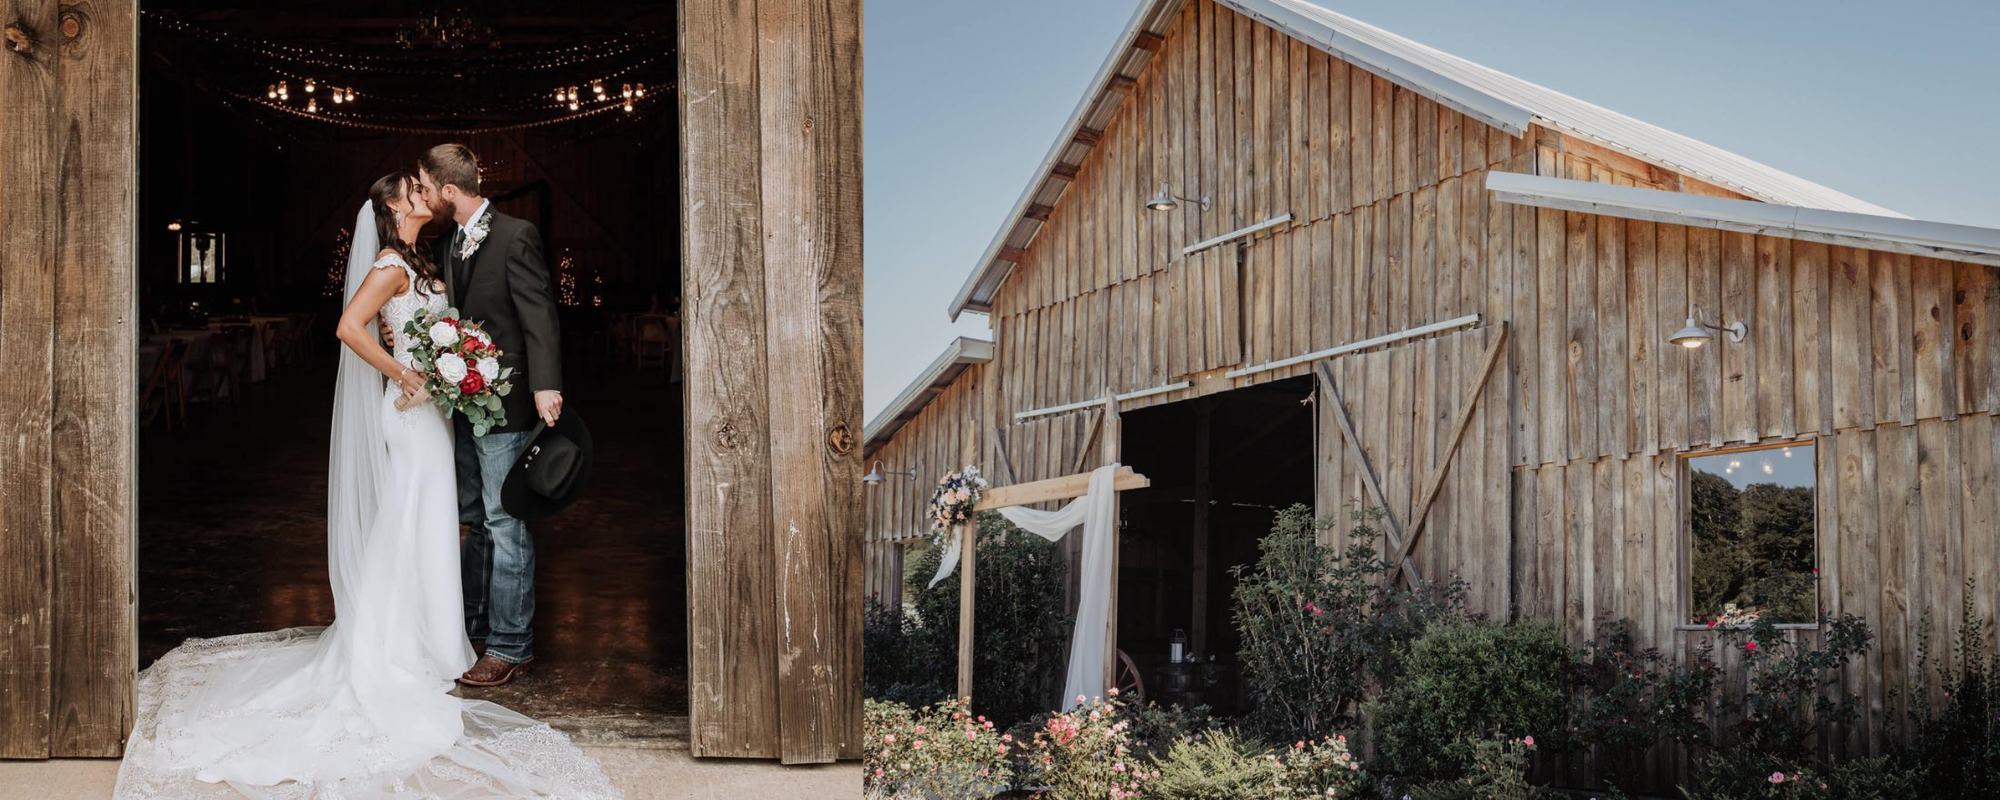 bride and groom kissing and rustic barn exterior view